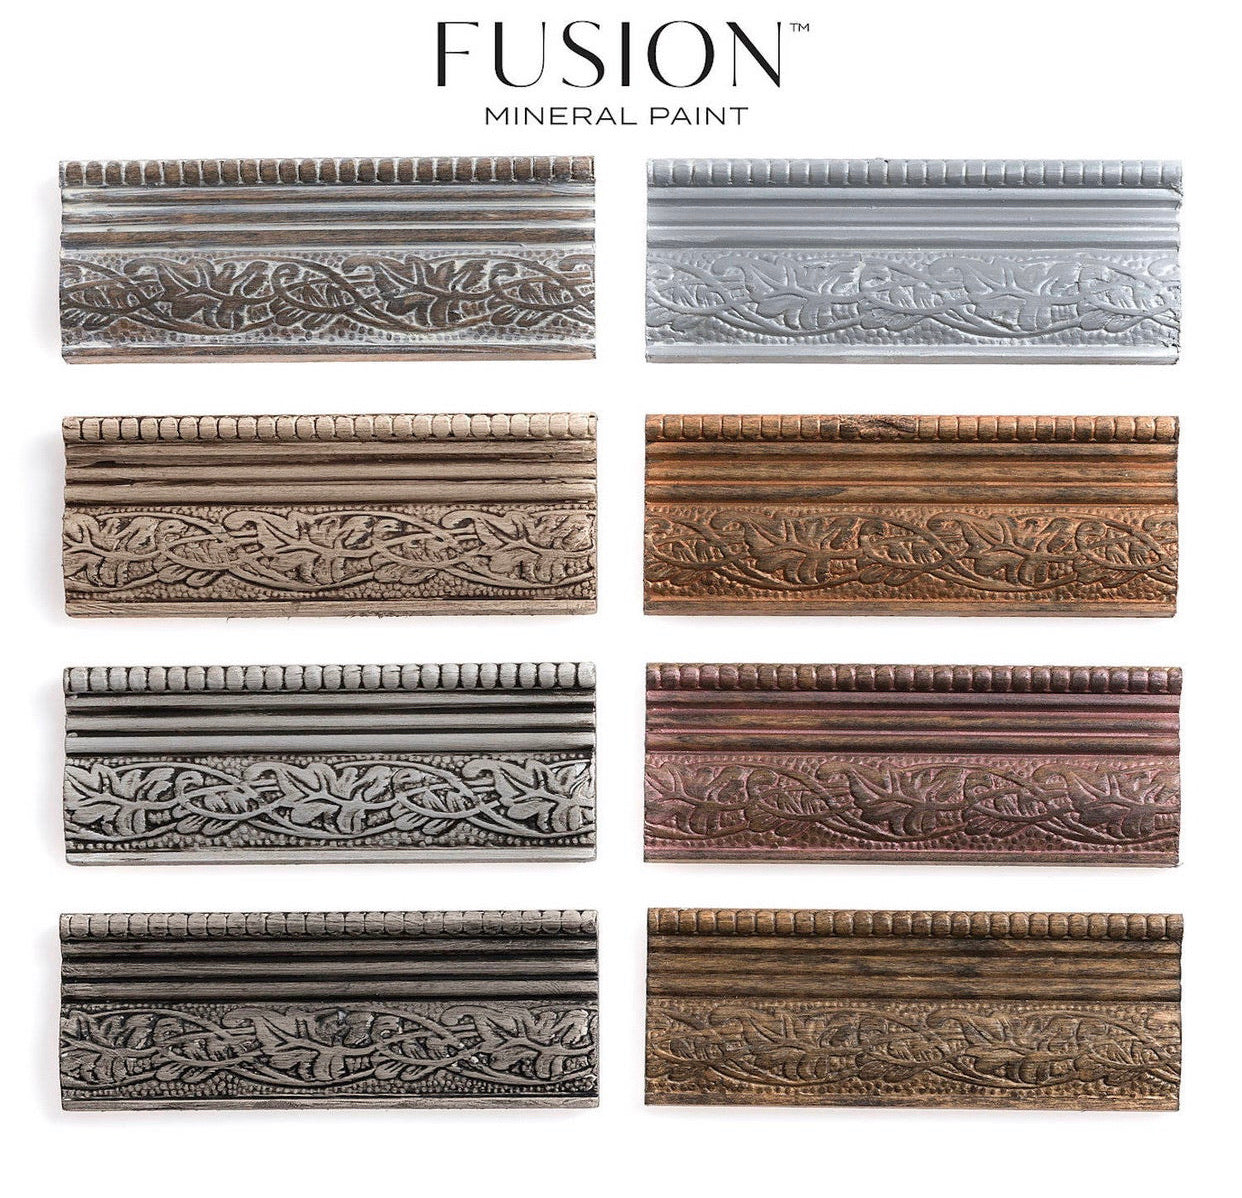 Fusion Furniture Wax – 200g – Hills of Tuscany – Vintique Finishes